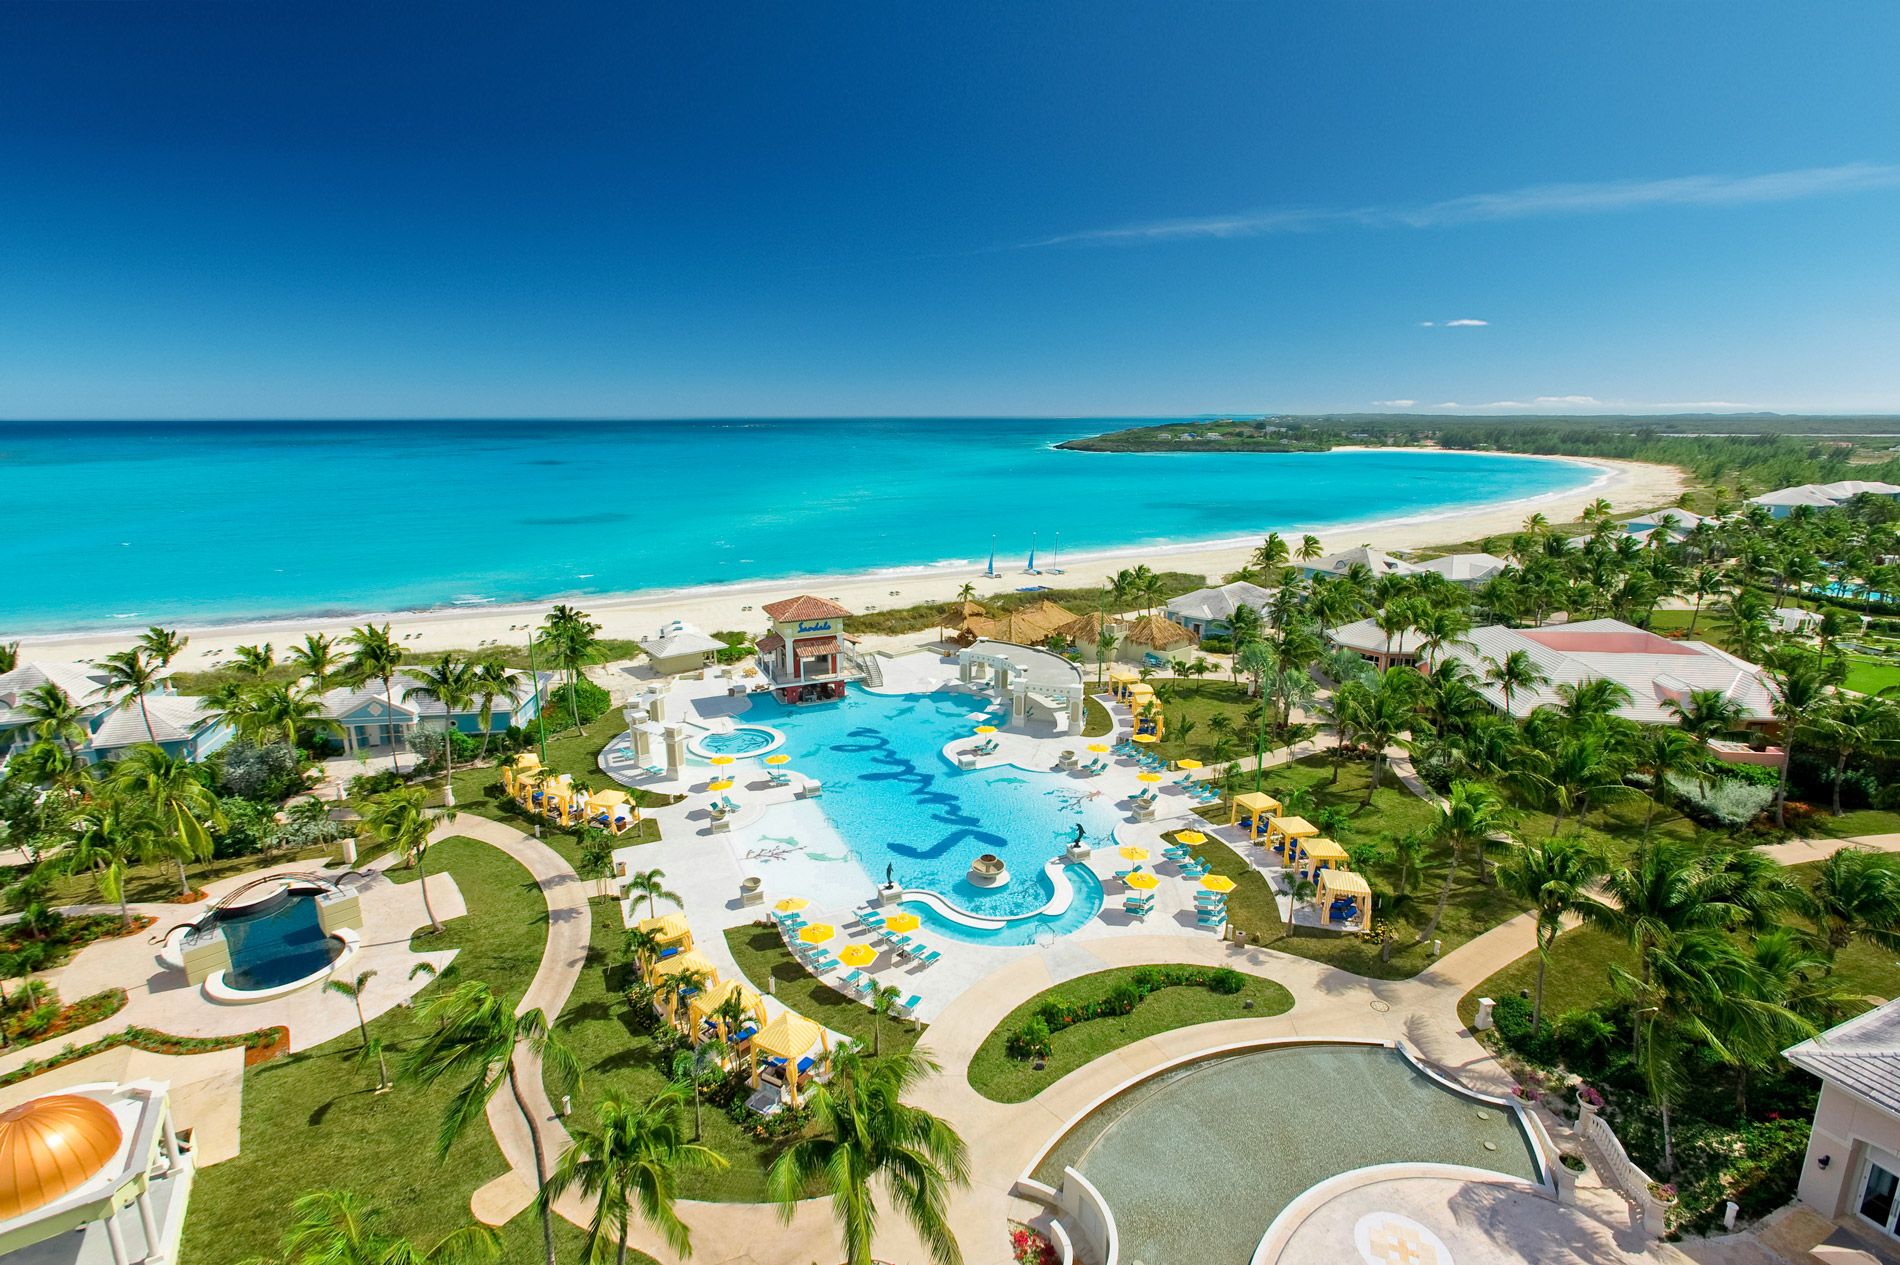 Three things guests love about... Sandals Emerald Bay. A full review.